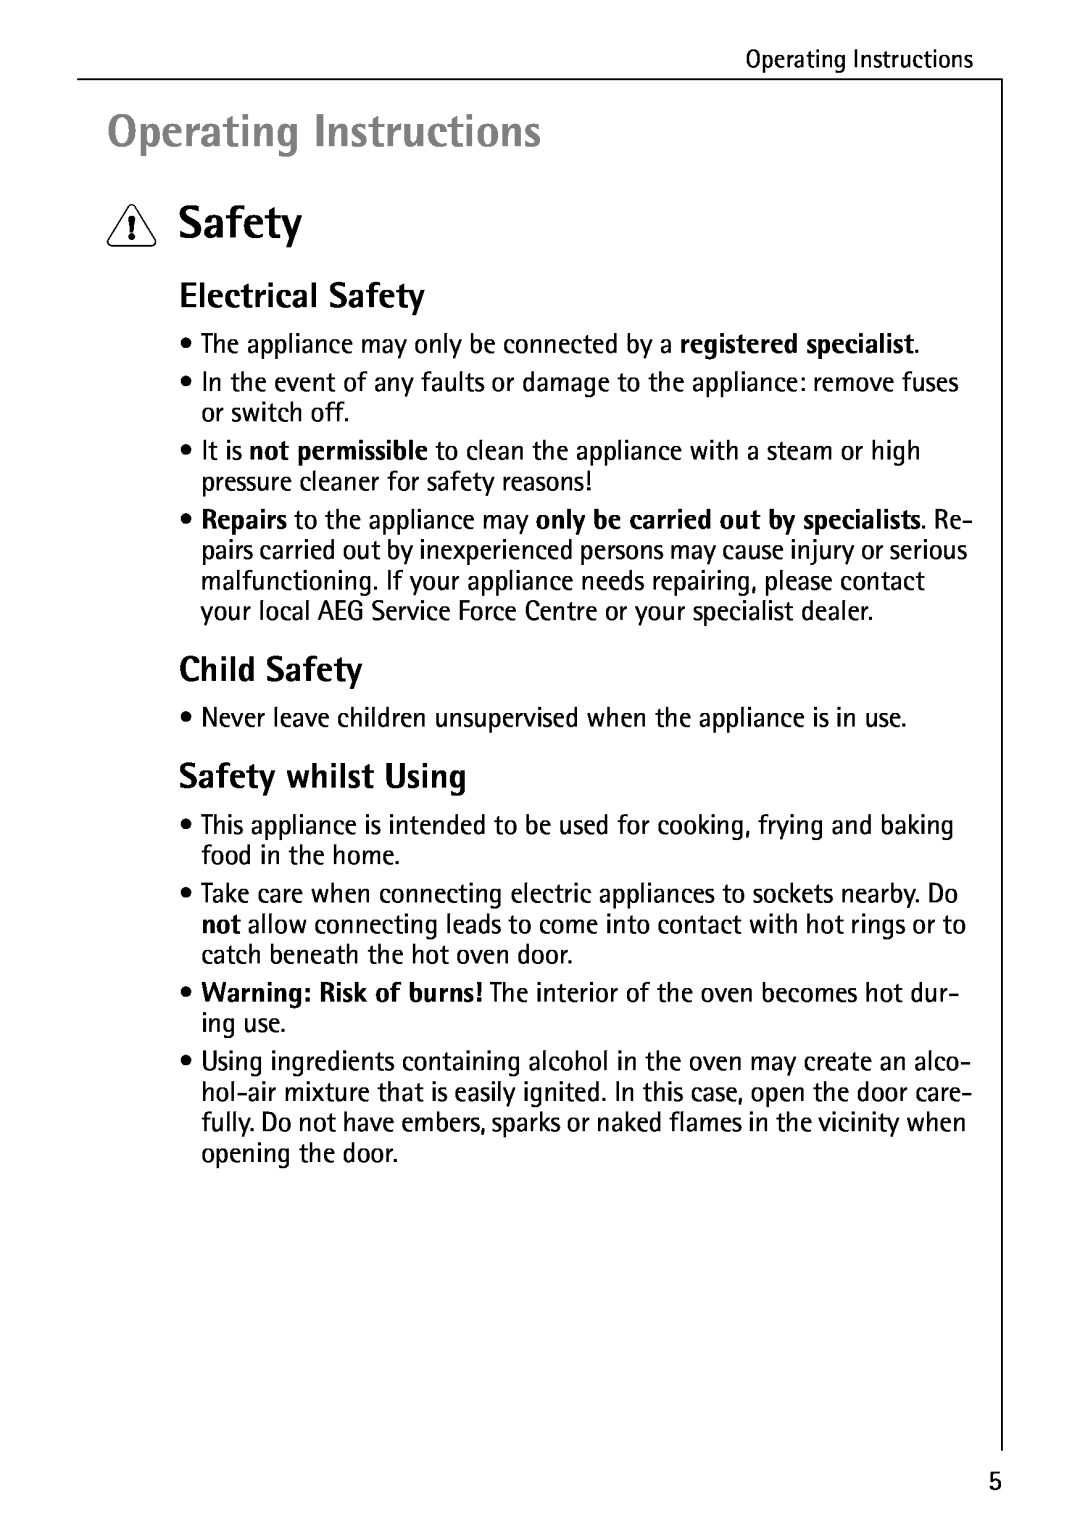 Electrolux B4140-1 manual Operating Instructions, Electrical Safety, Child Safety, Safety whilst Using 